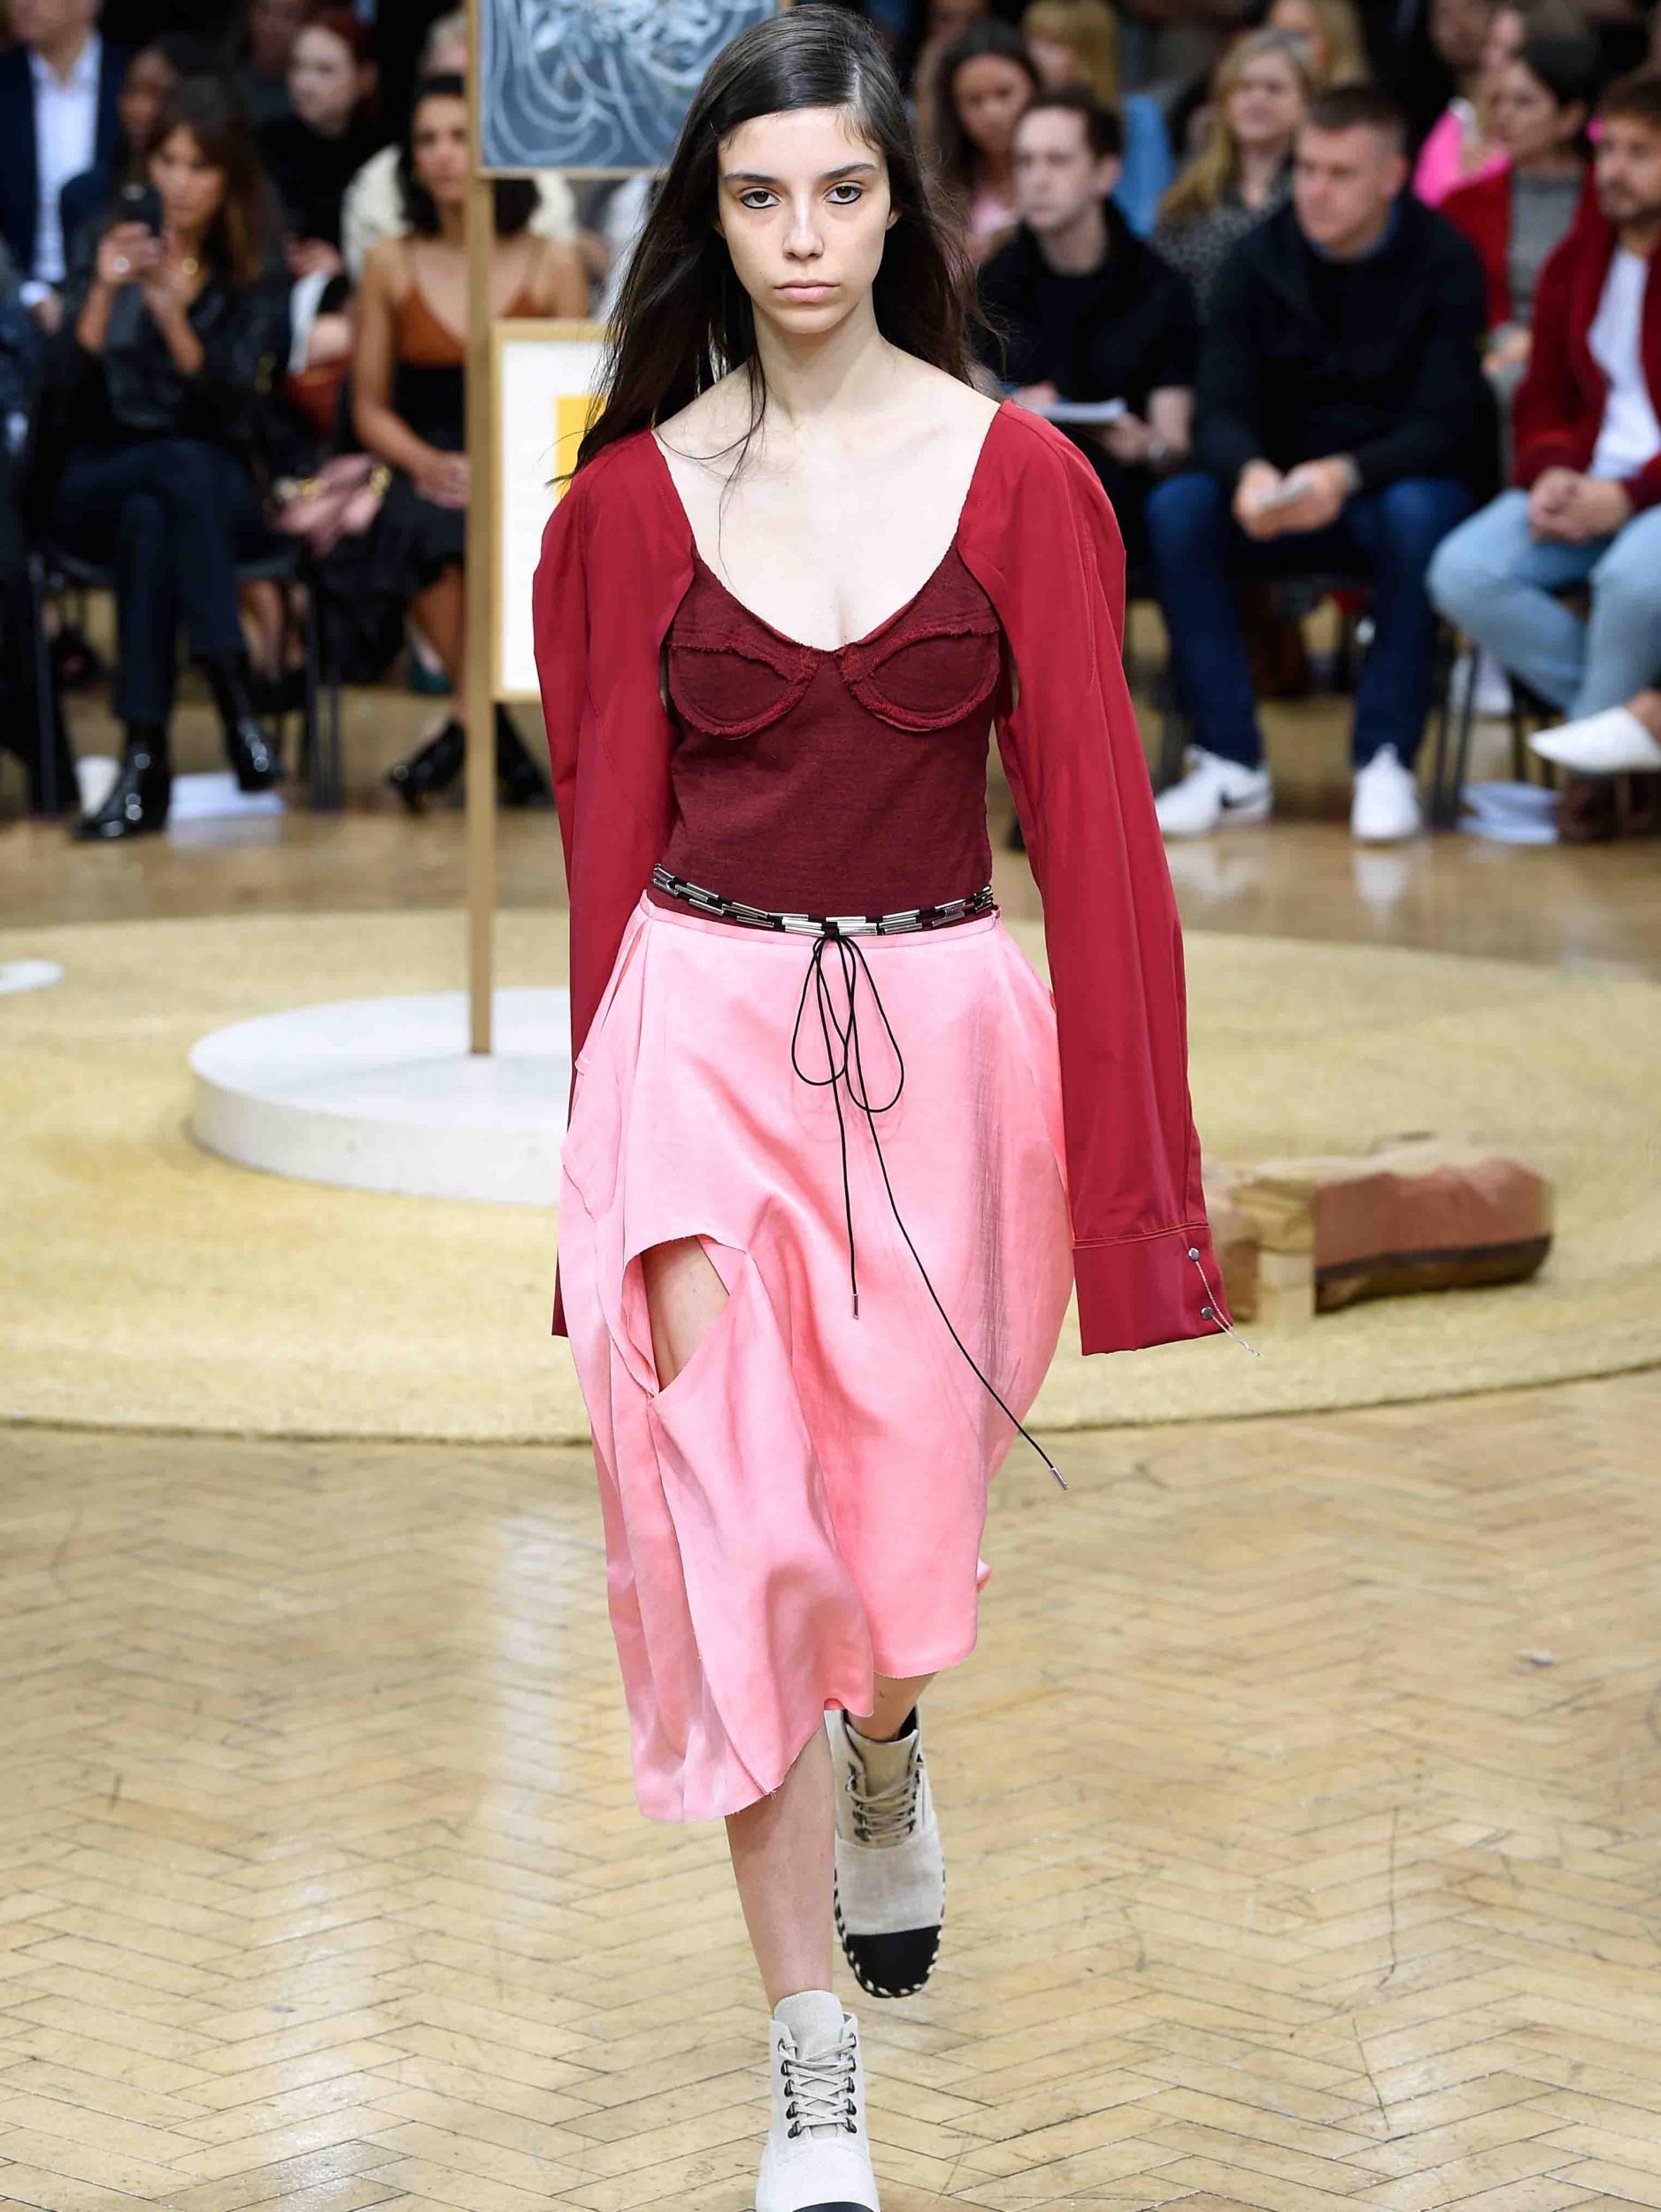 JW Anderson’s upcoming show will see male and female models strut their stuff side by side